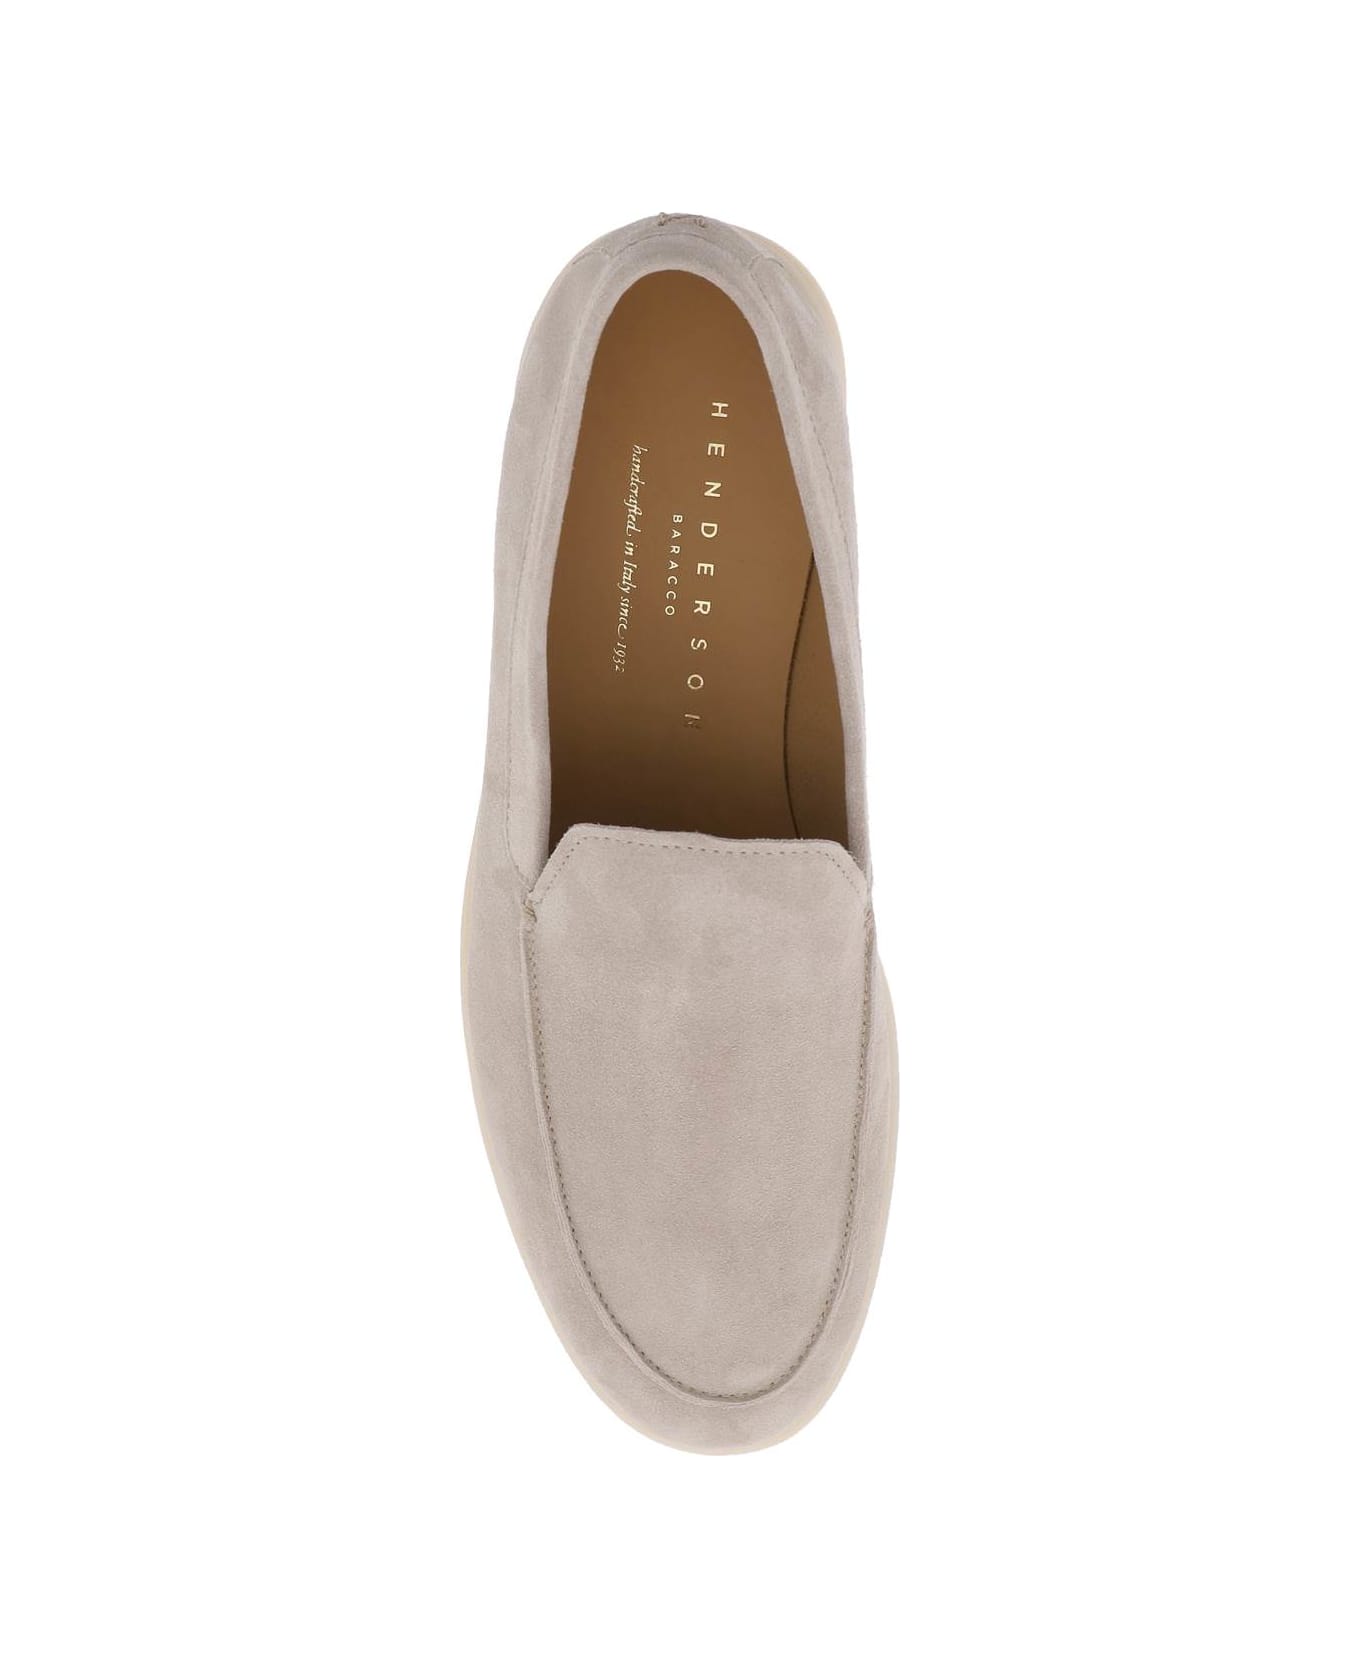 Henderson Baracco Suede Loafers - NEUTRALS